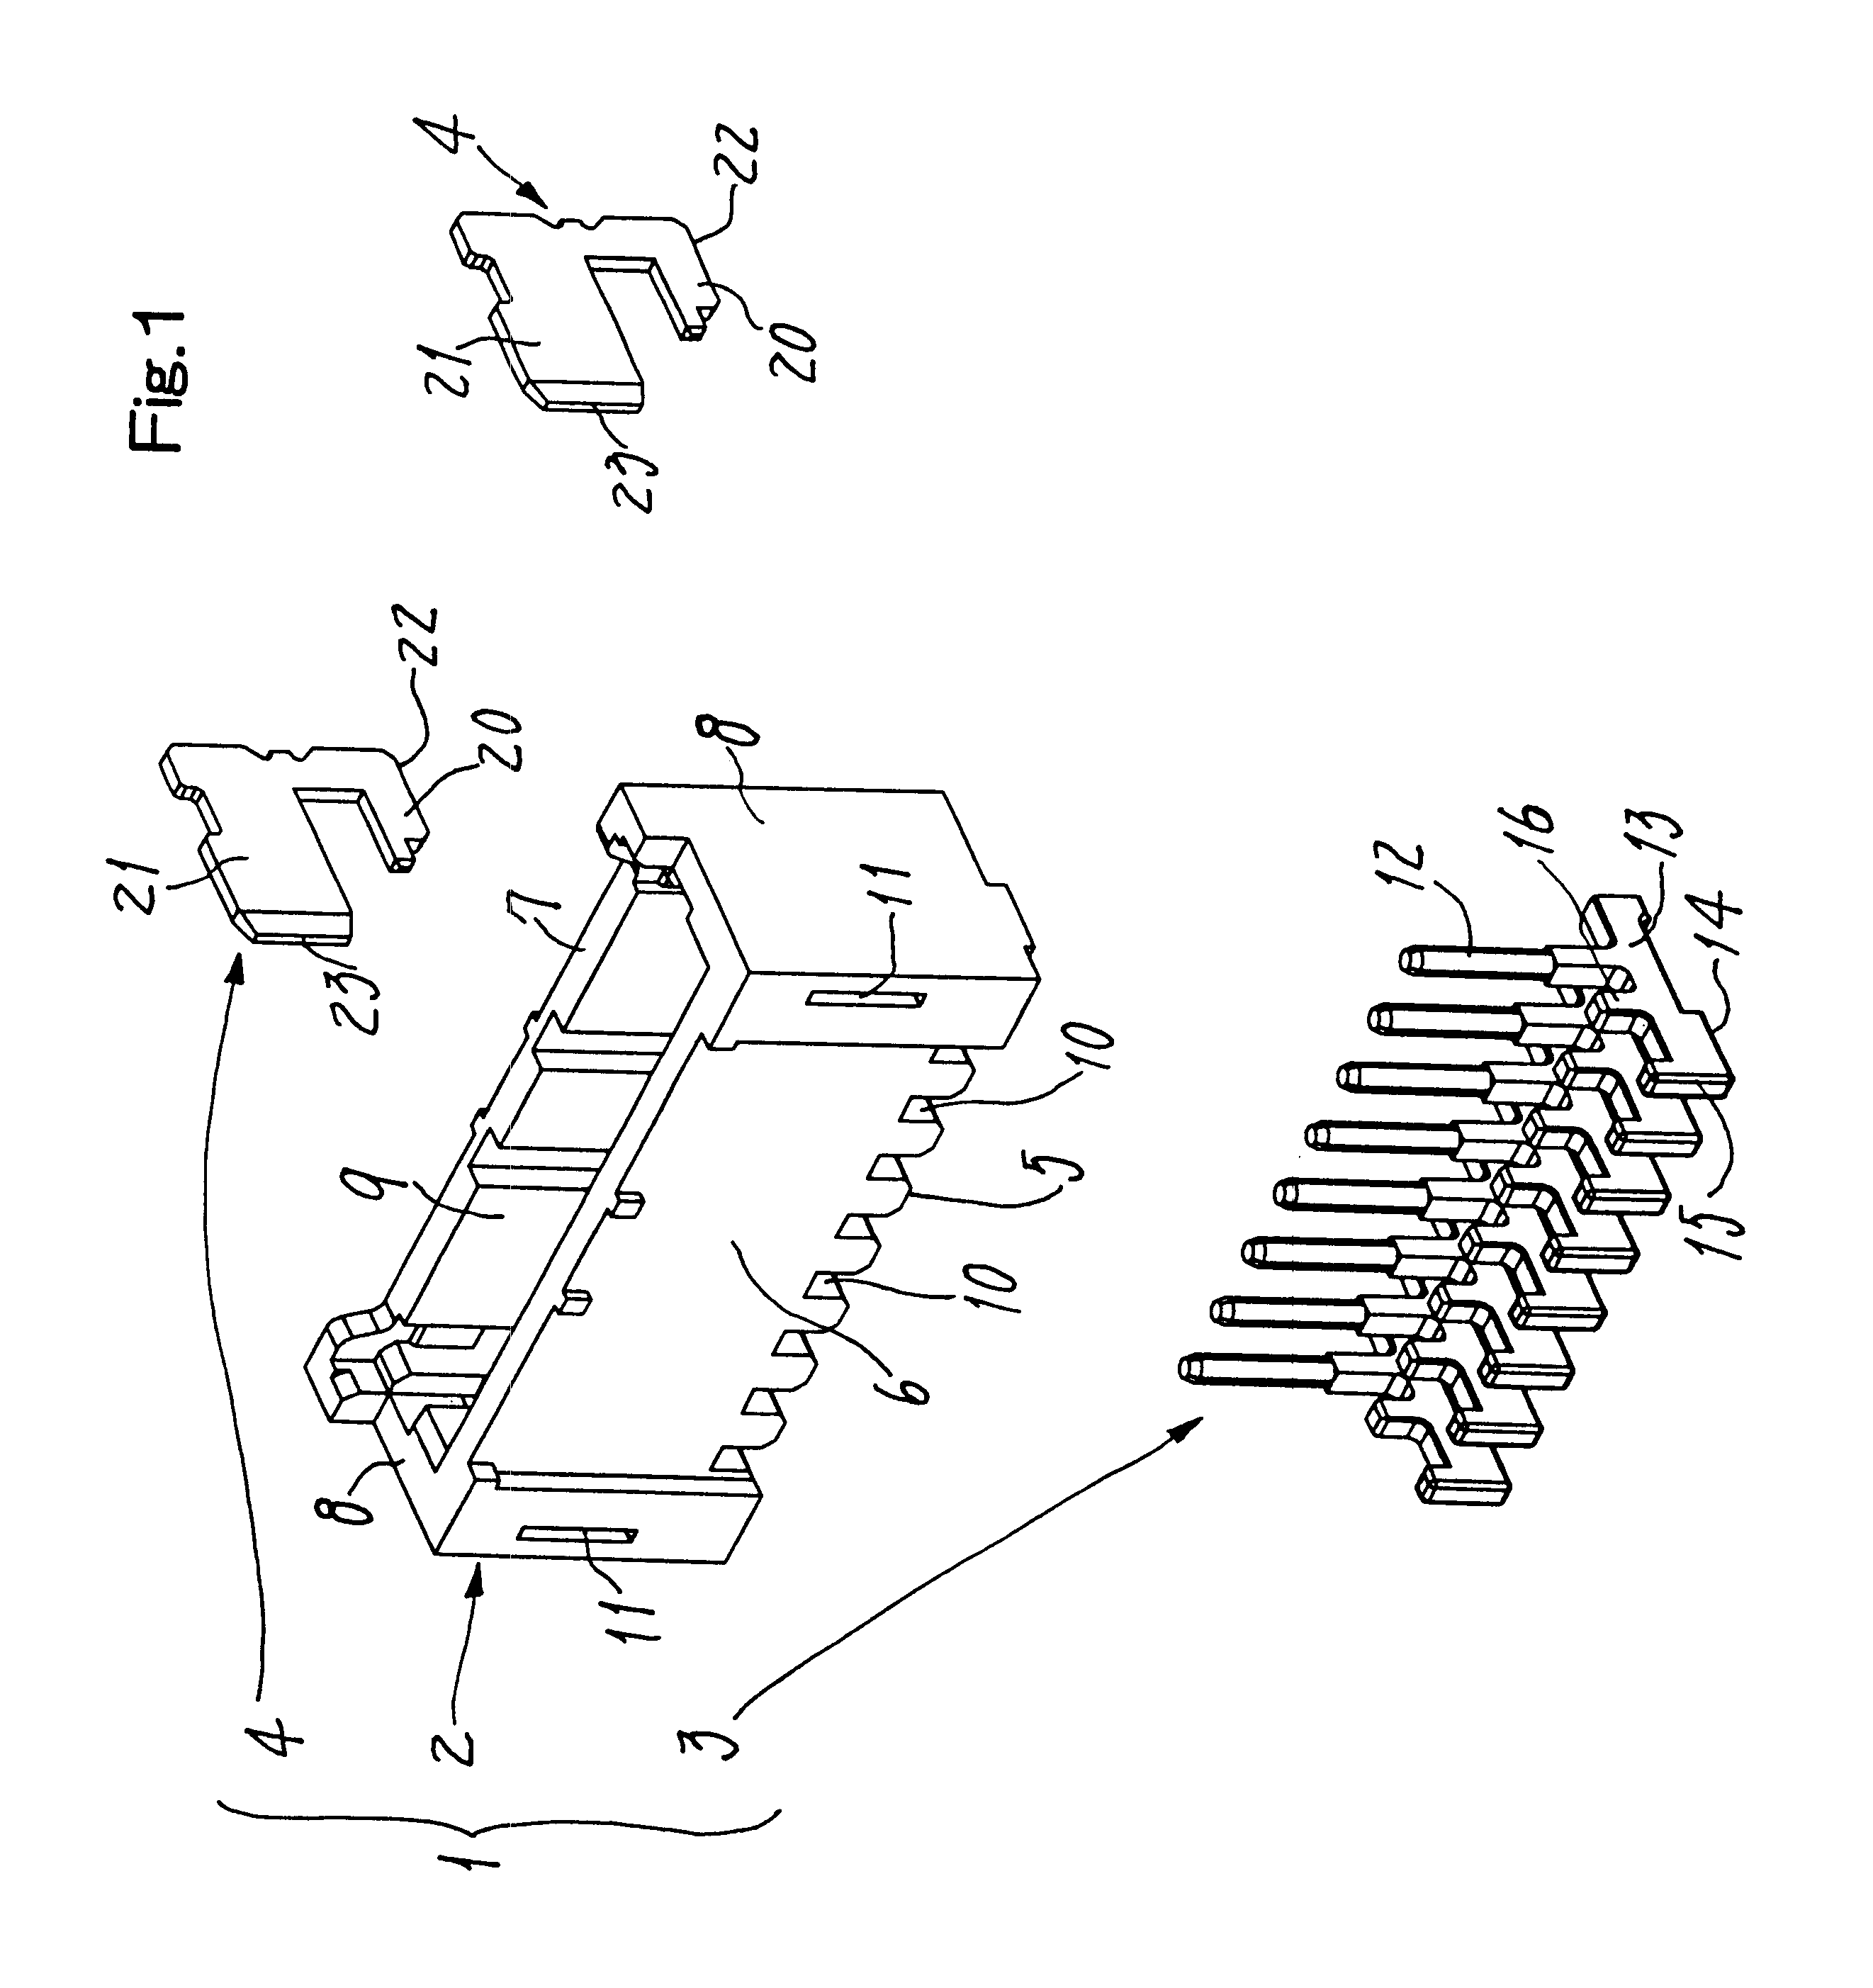 Horizontally and vertically convertible connector for printed circuit boards